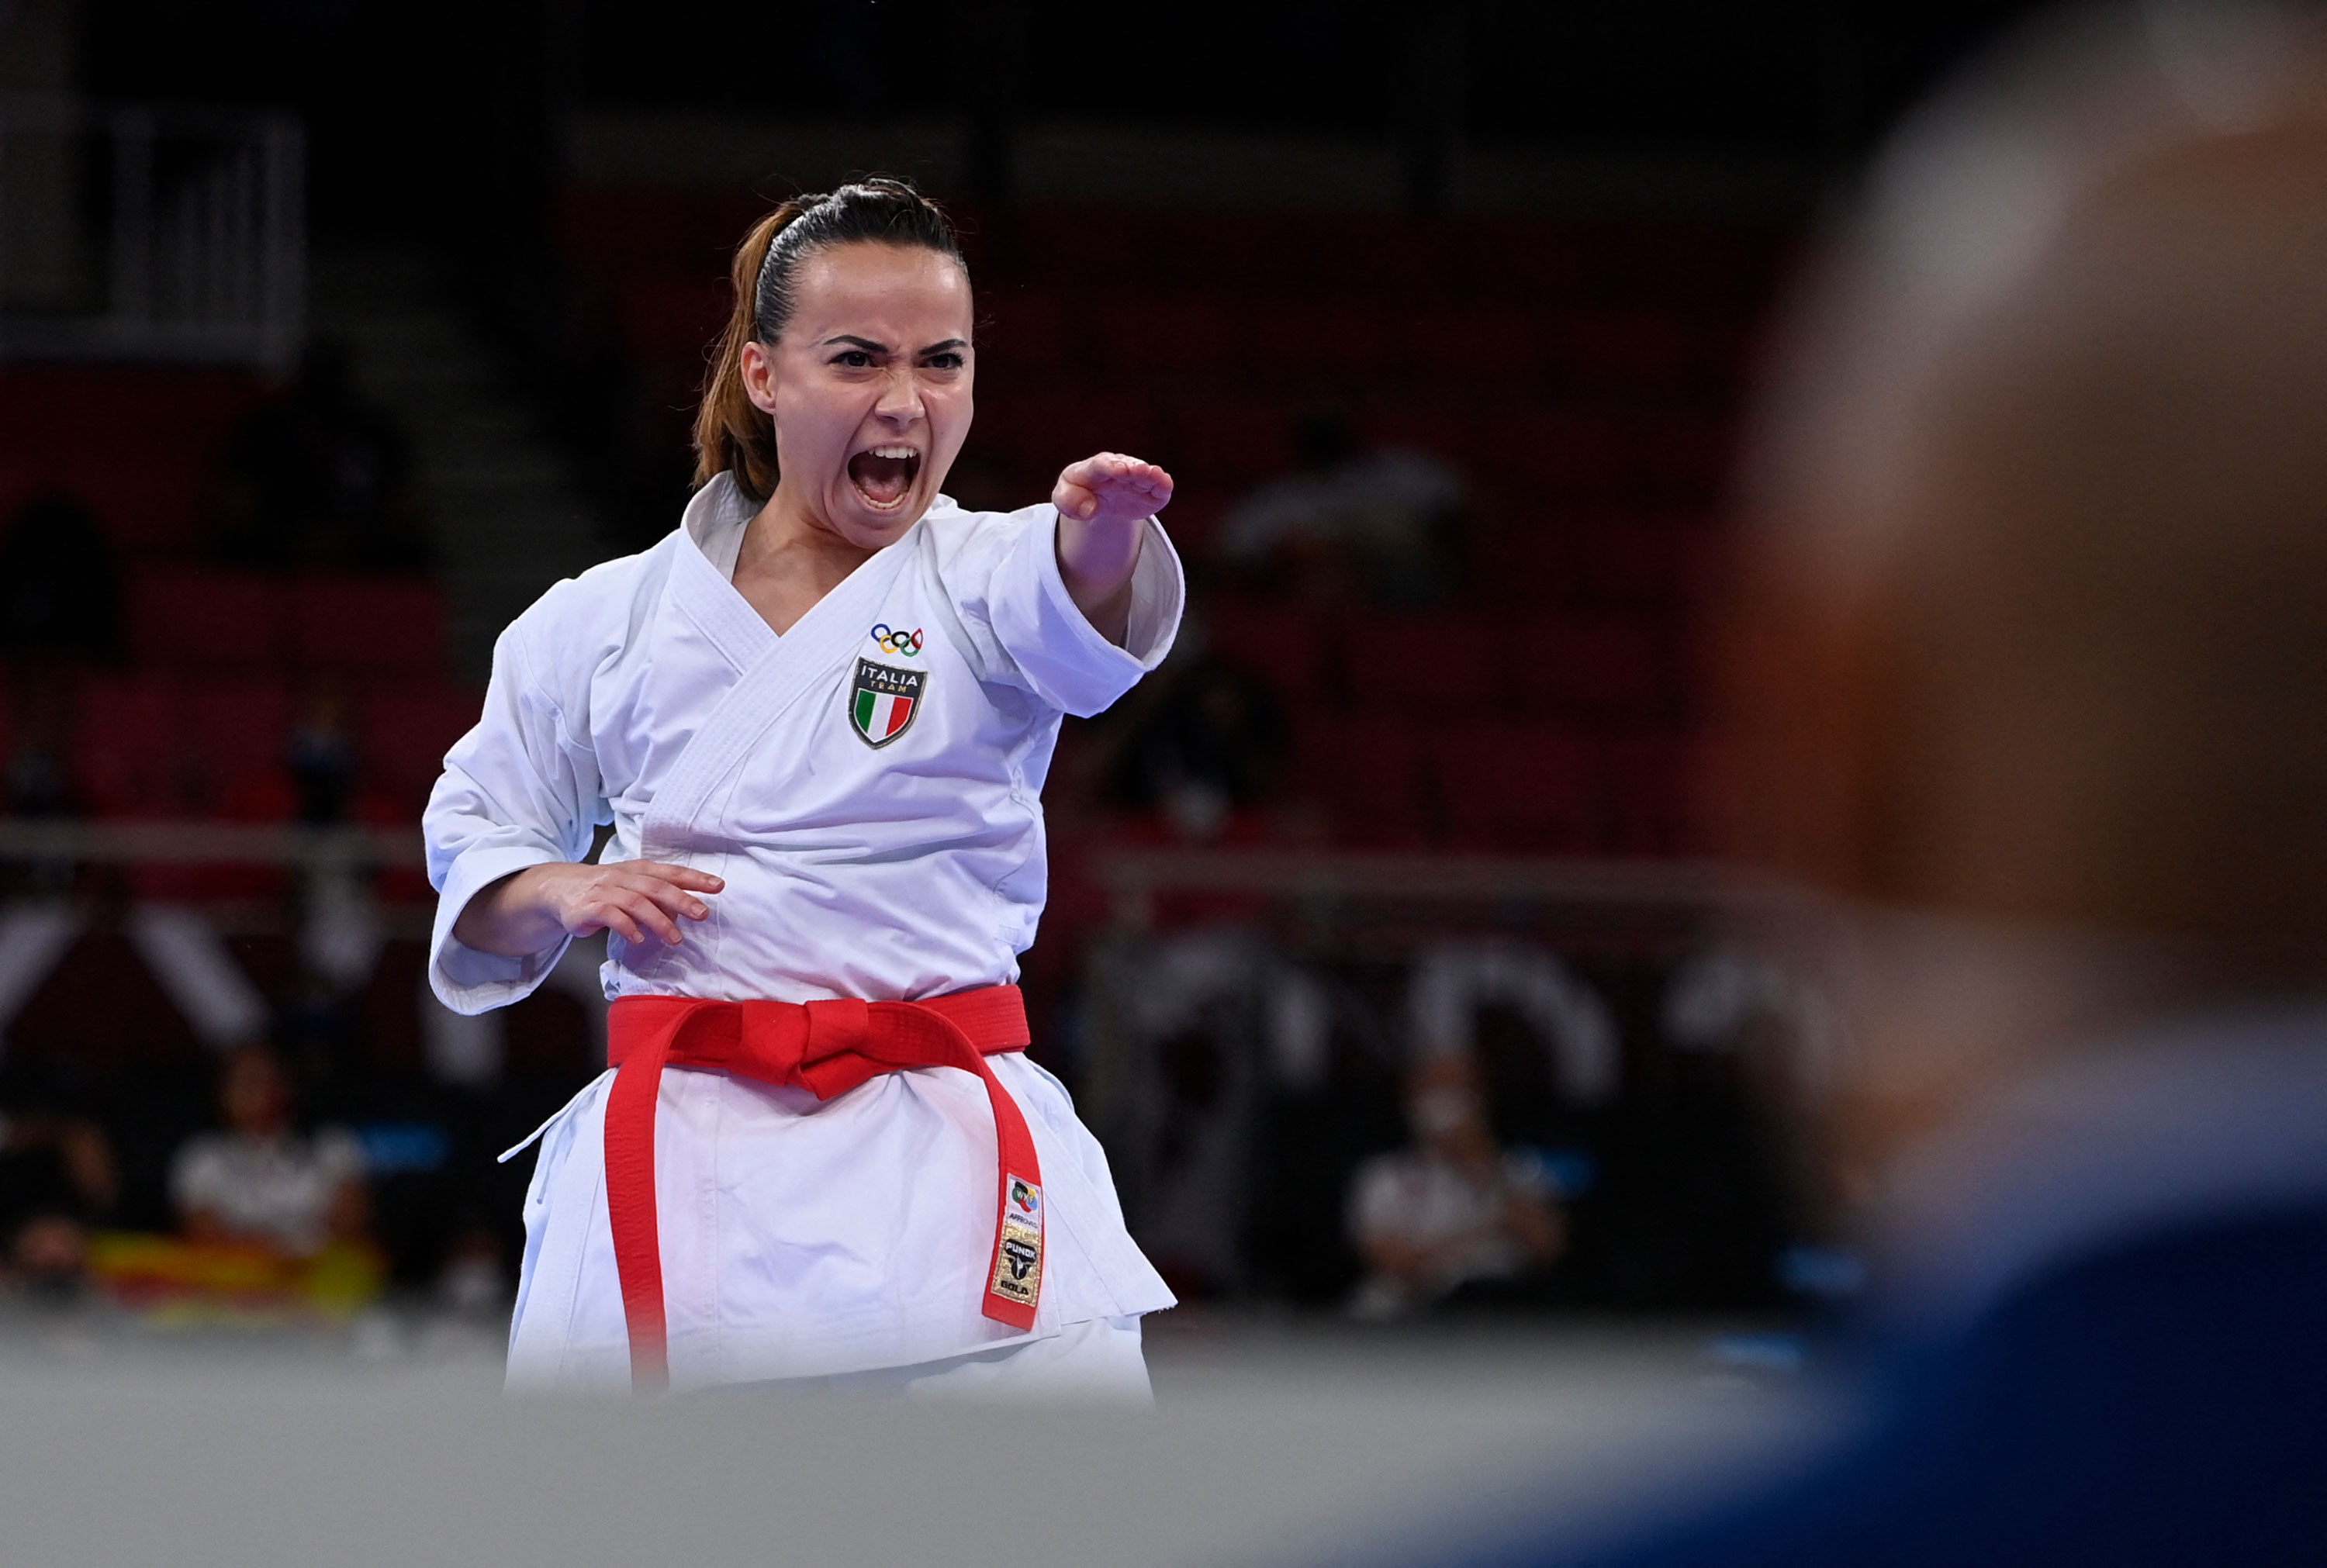 Italy's Viviana Bottaro performs in the kata event of karate competition on Thursday.